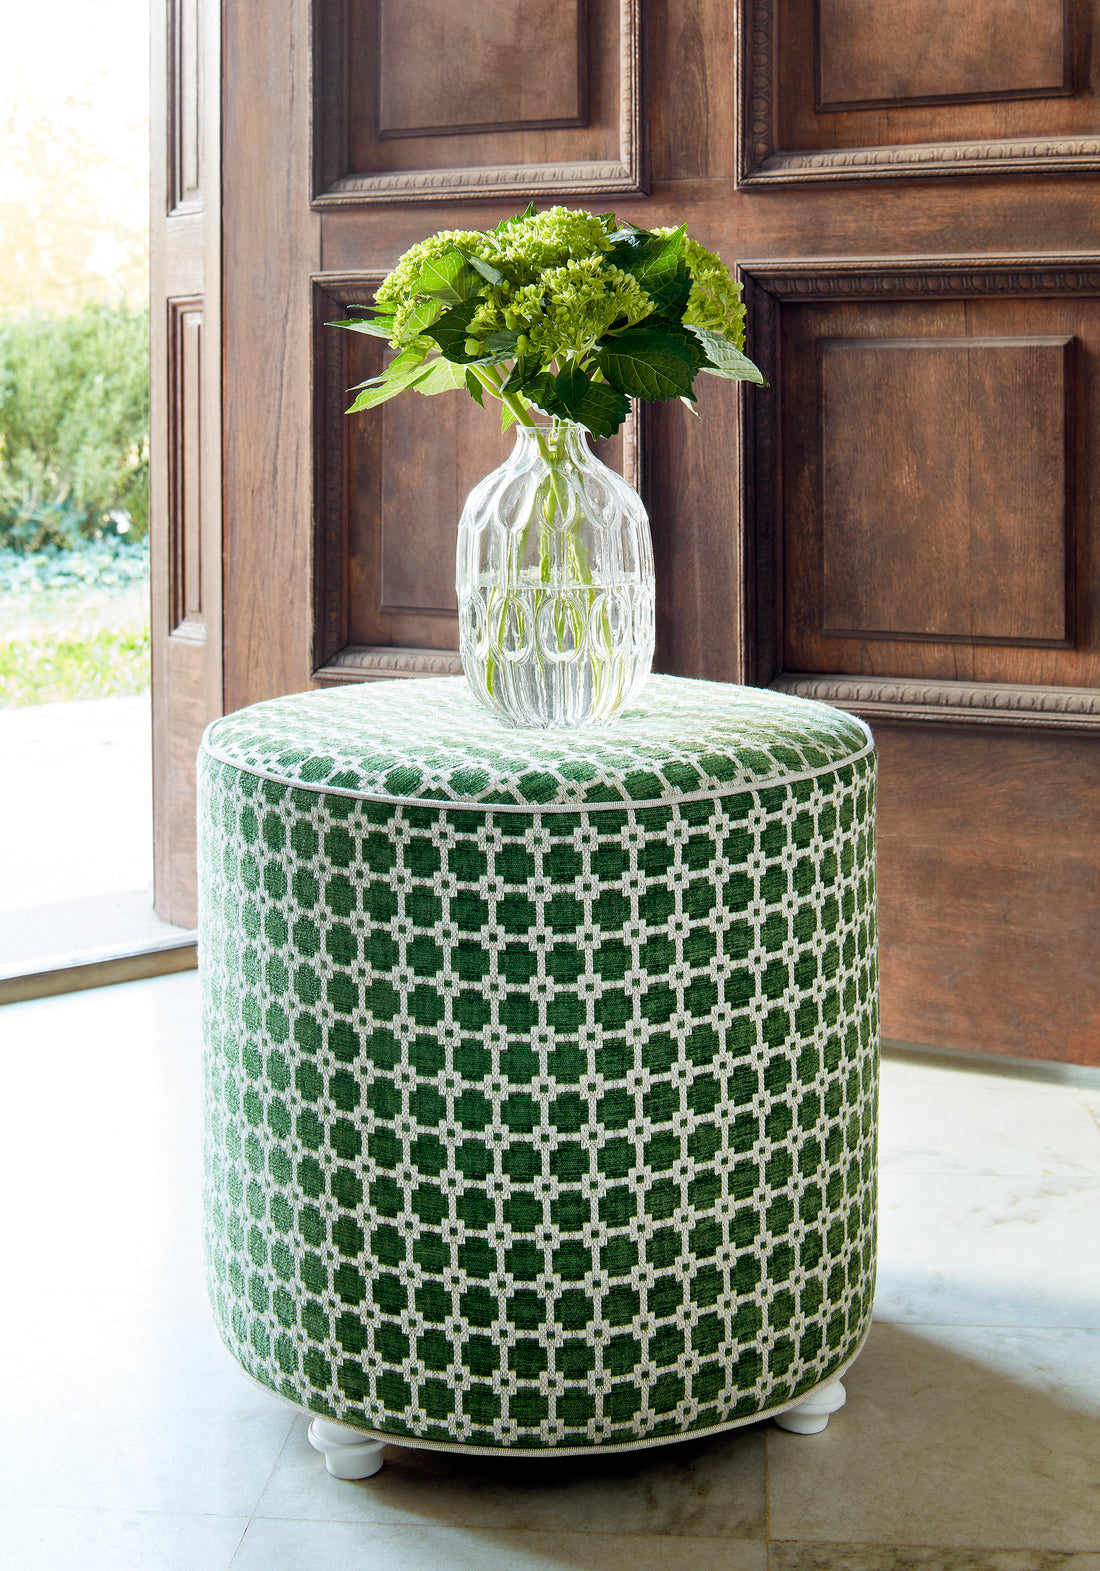 Roundabout Ottoman in Apollo woven fabric in emerald green color - pattern number W80718 - by Thibaut in the Woven Resource Vol 11 Rialto collection